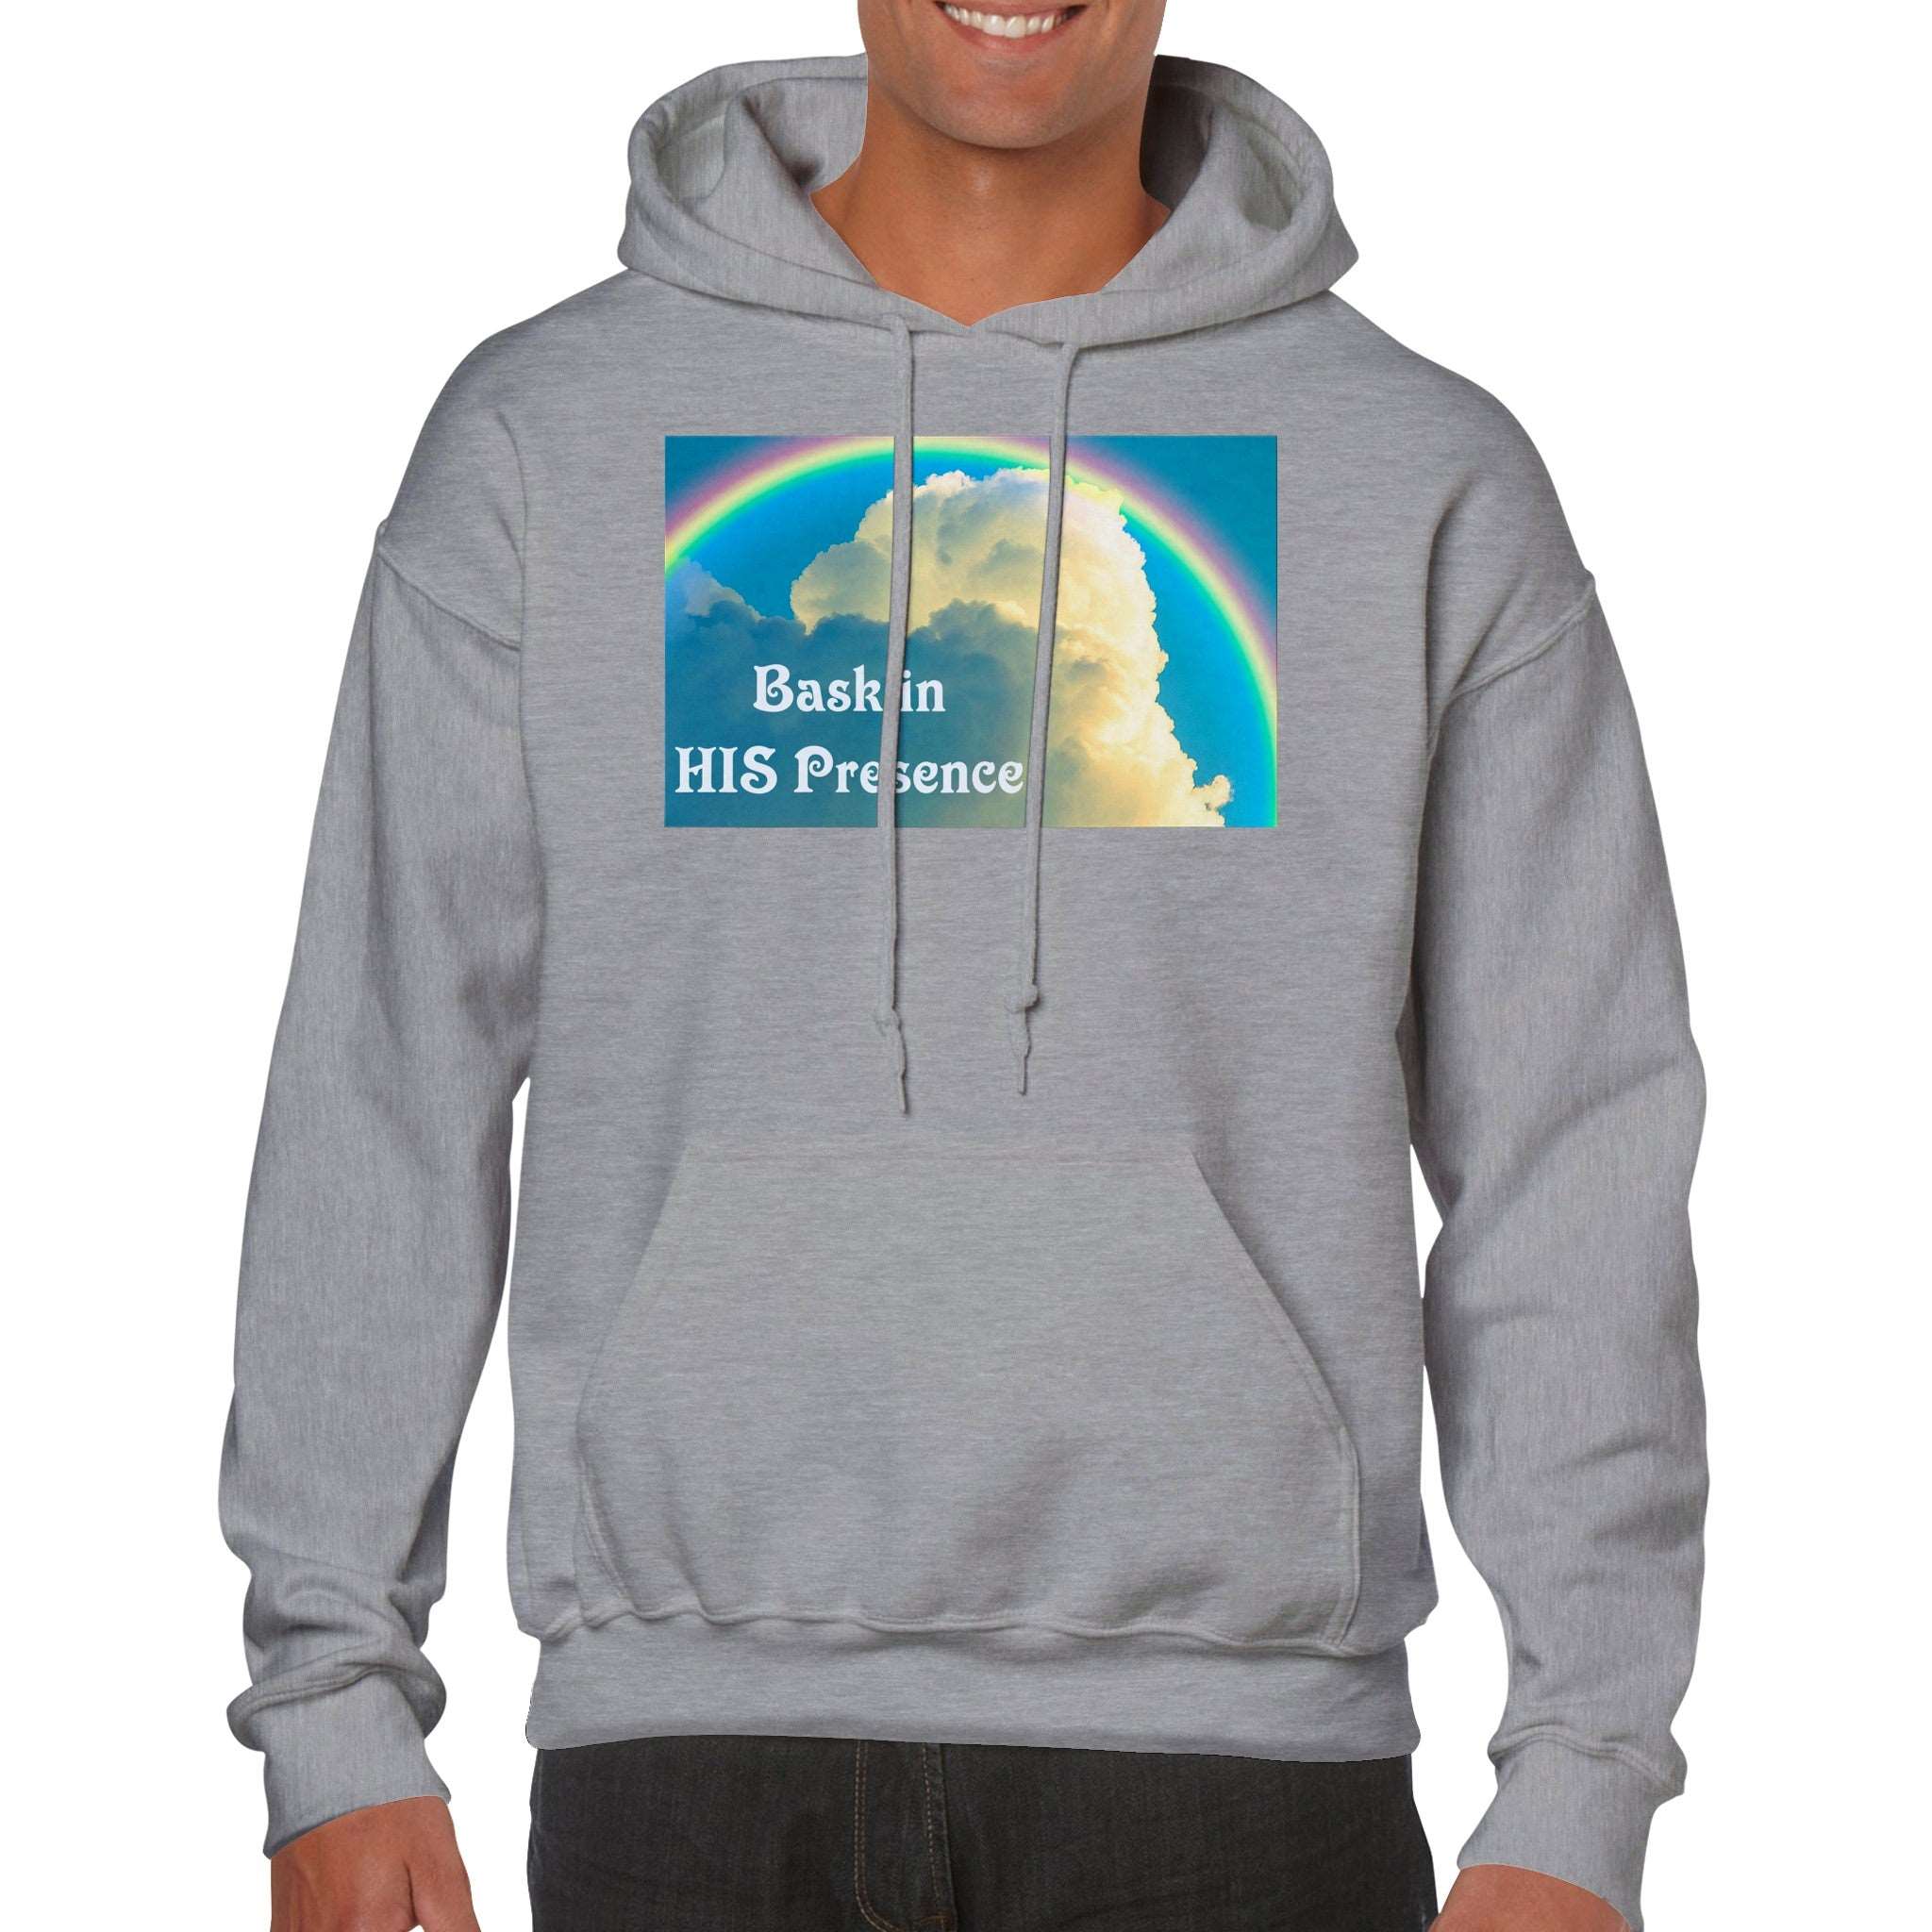 Bask in HIS Presence Clouds and Rainbow Unisex Pullover Hoodie up to 3XL